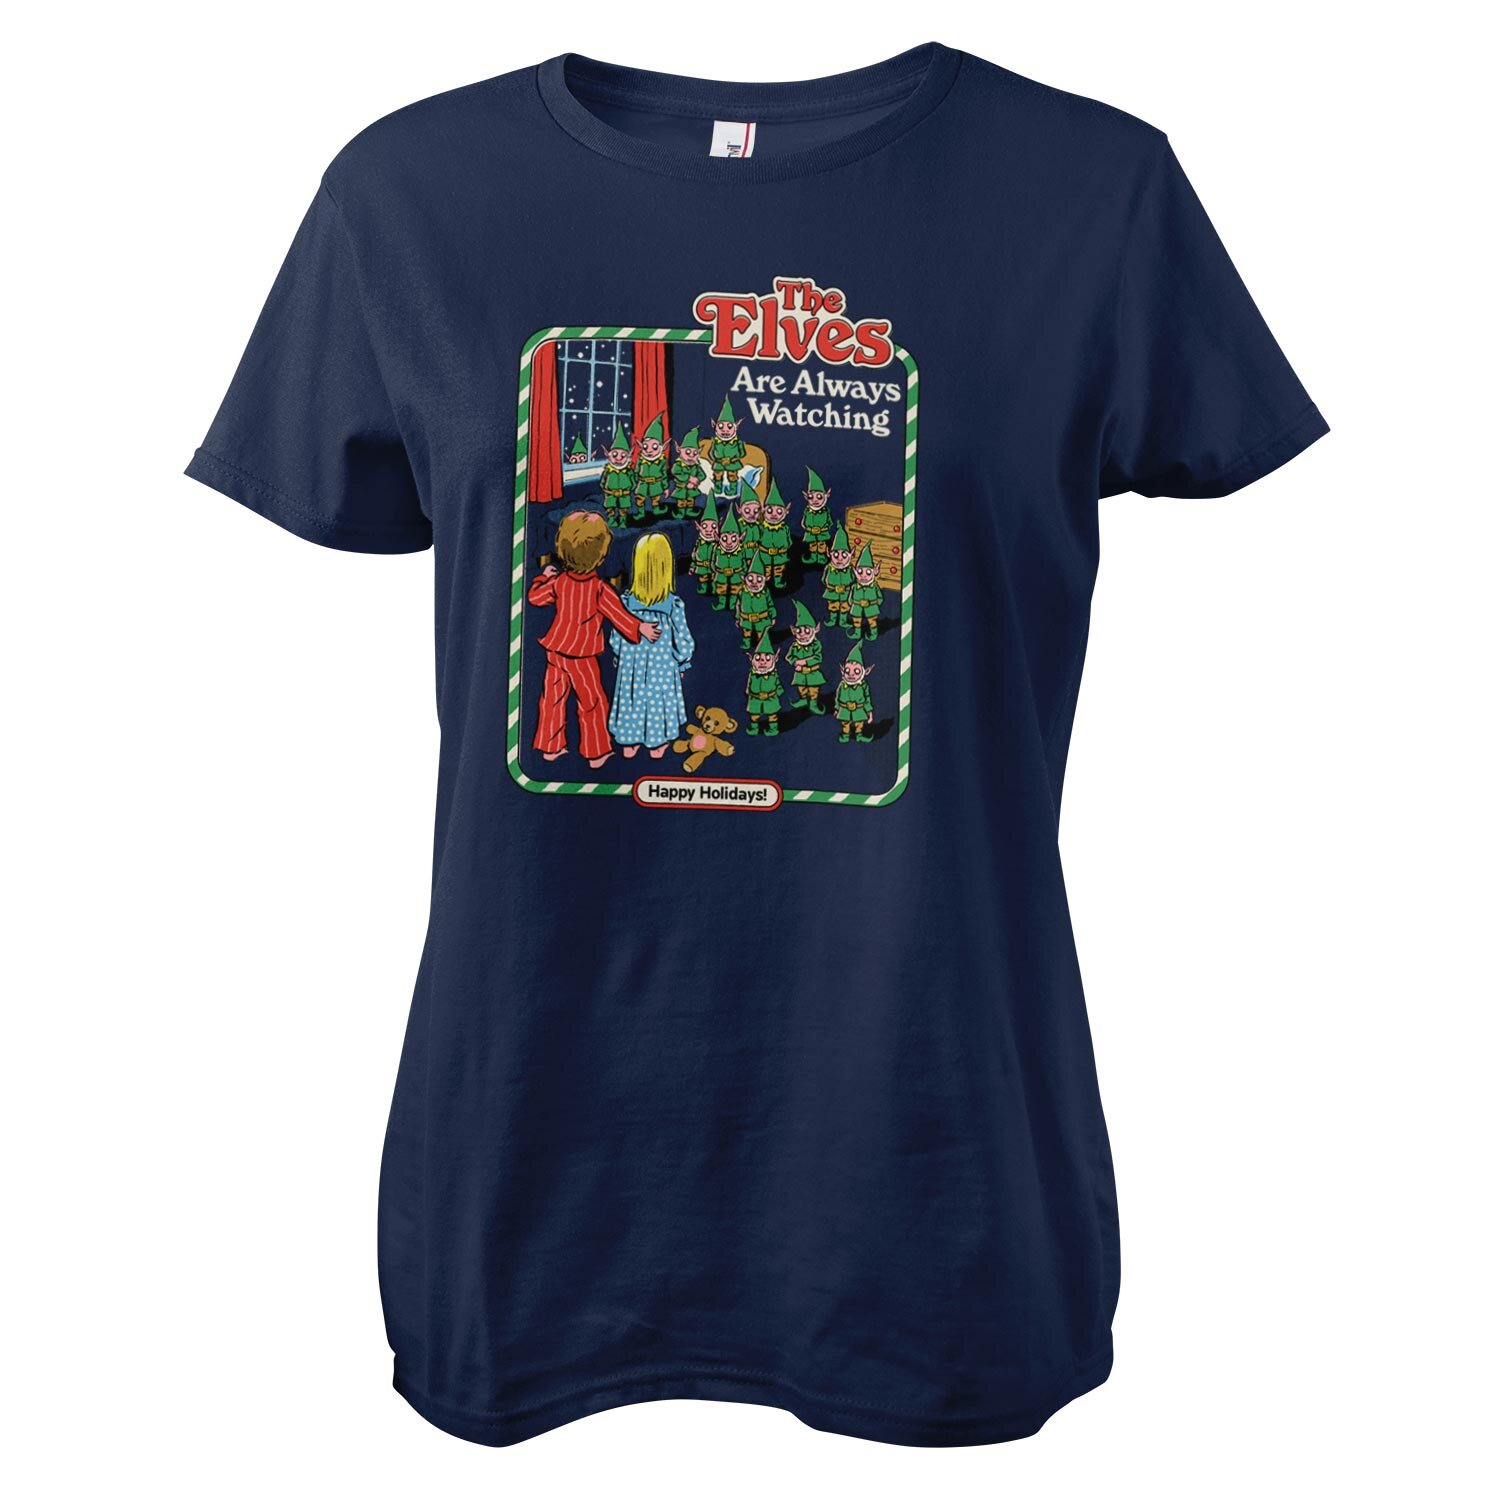 The Elves Are Watching Girly Tee